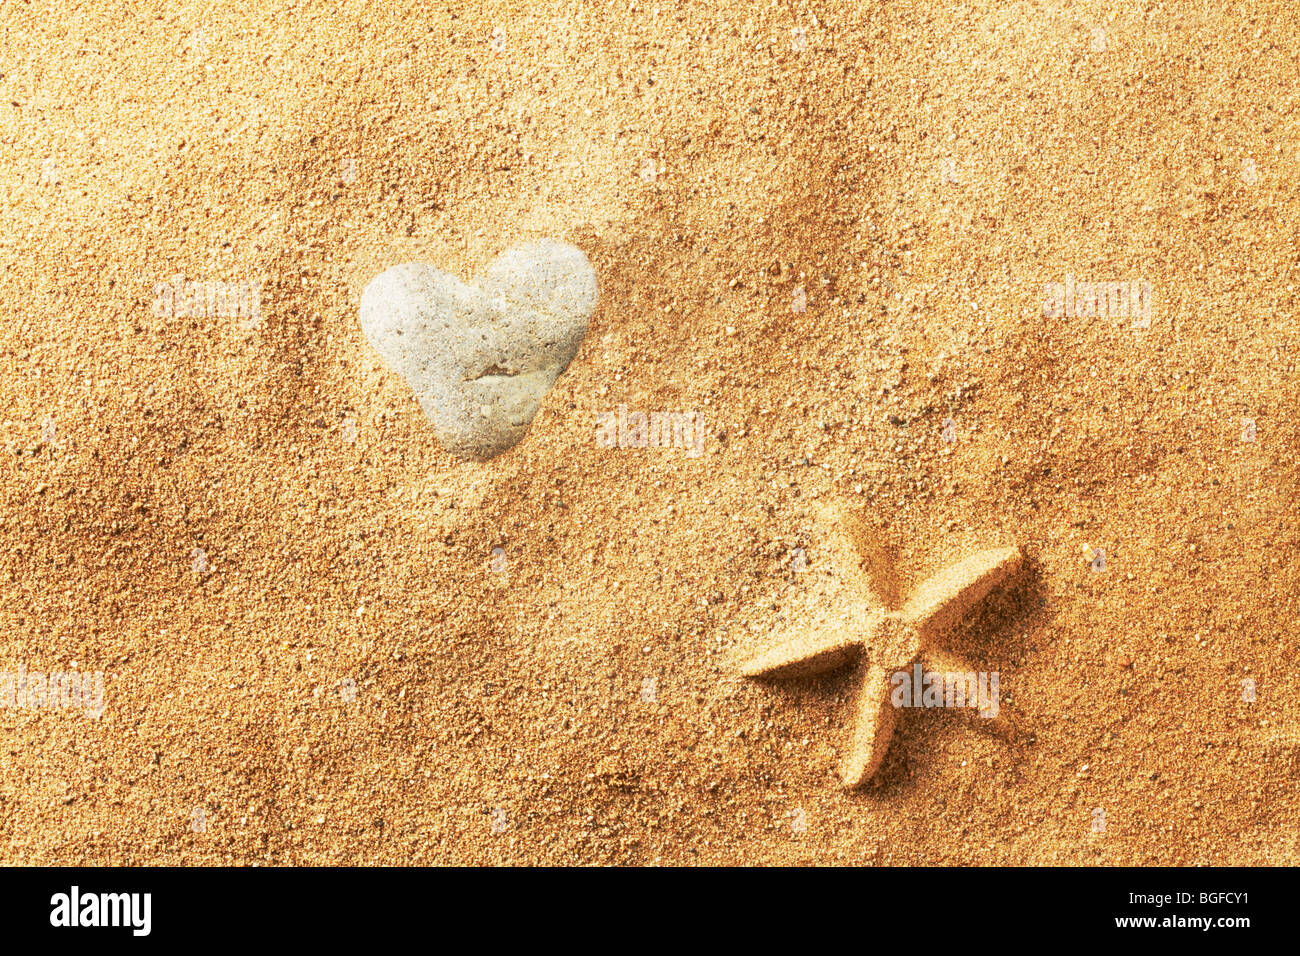 Heart Shaped Stone in Sand Stock Photo